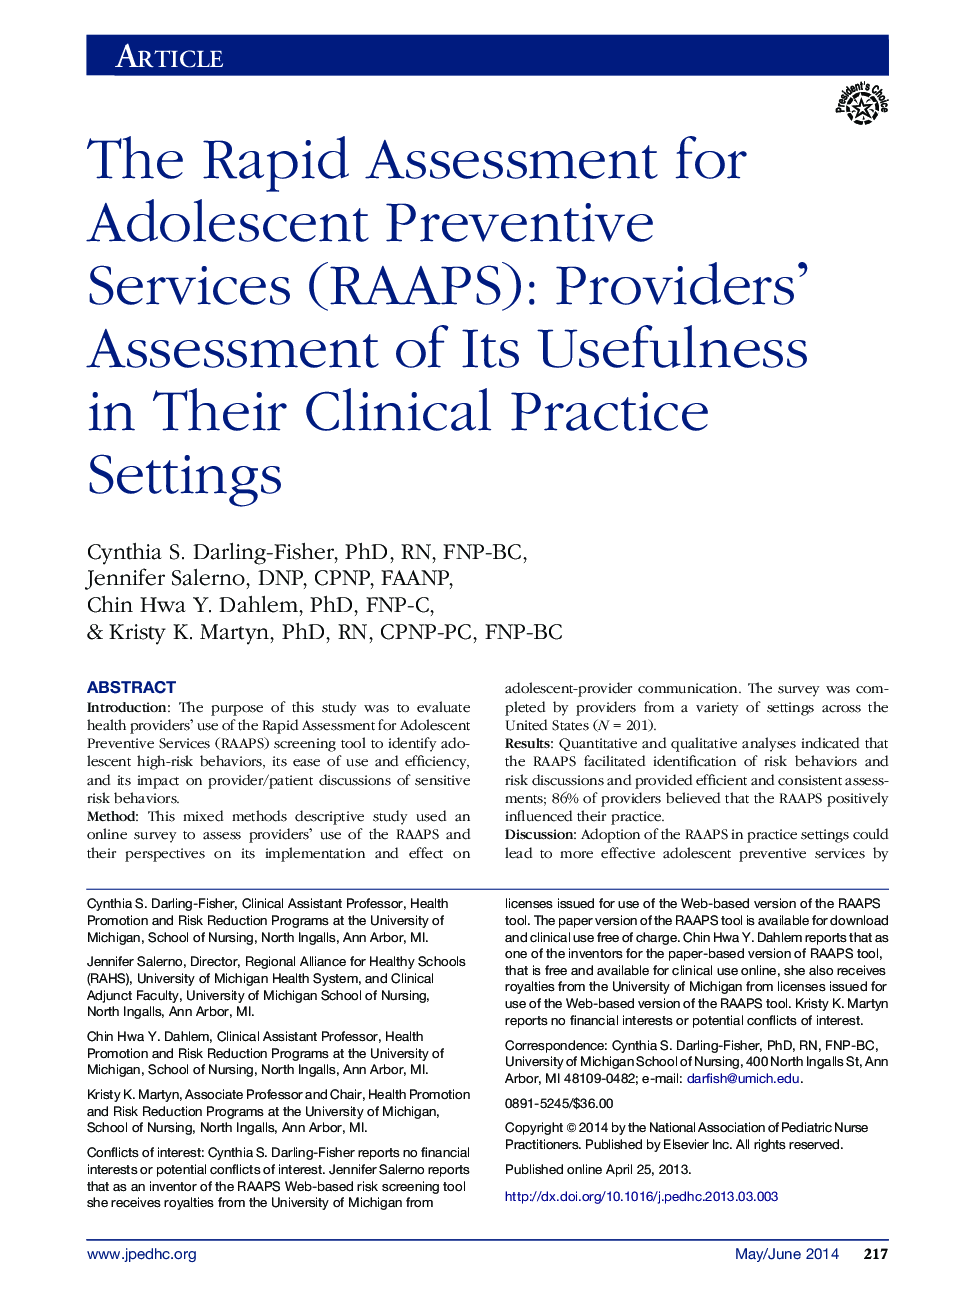 The Rapid Assessment for Adolescent Preventive Services (RAAPS): Providers’ Assessment of Its Usefulness in Their Clinical Practice Settings 